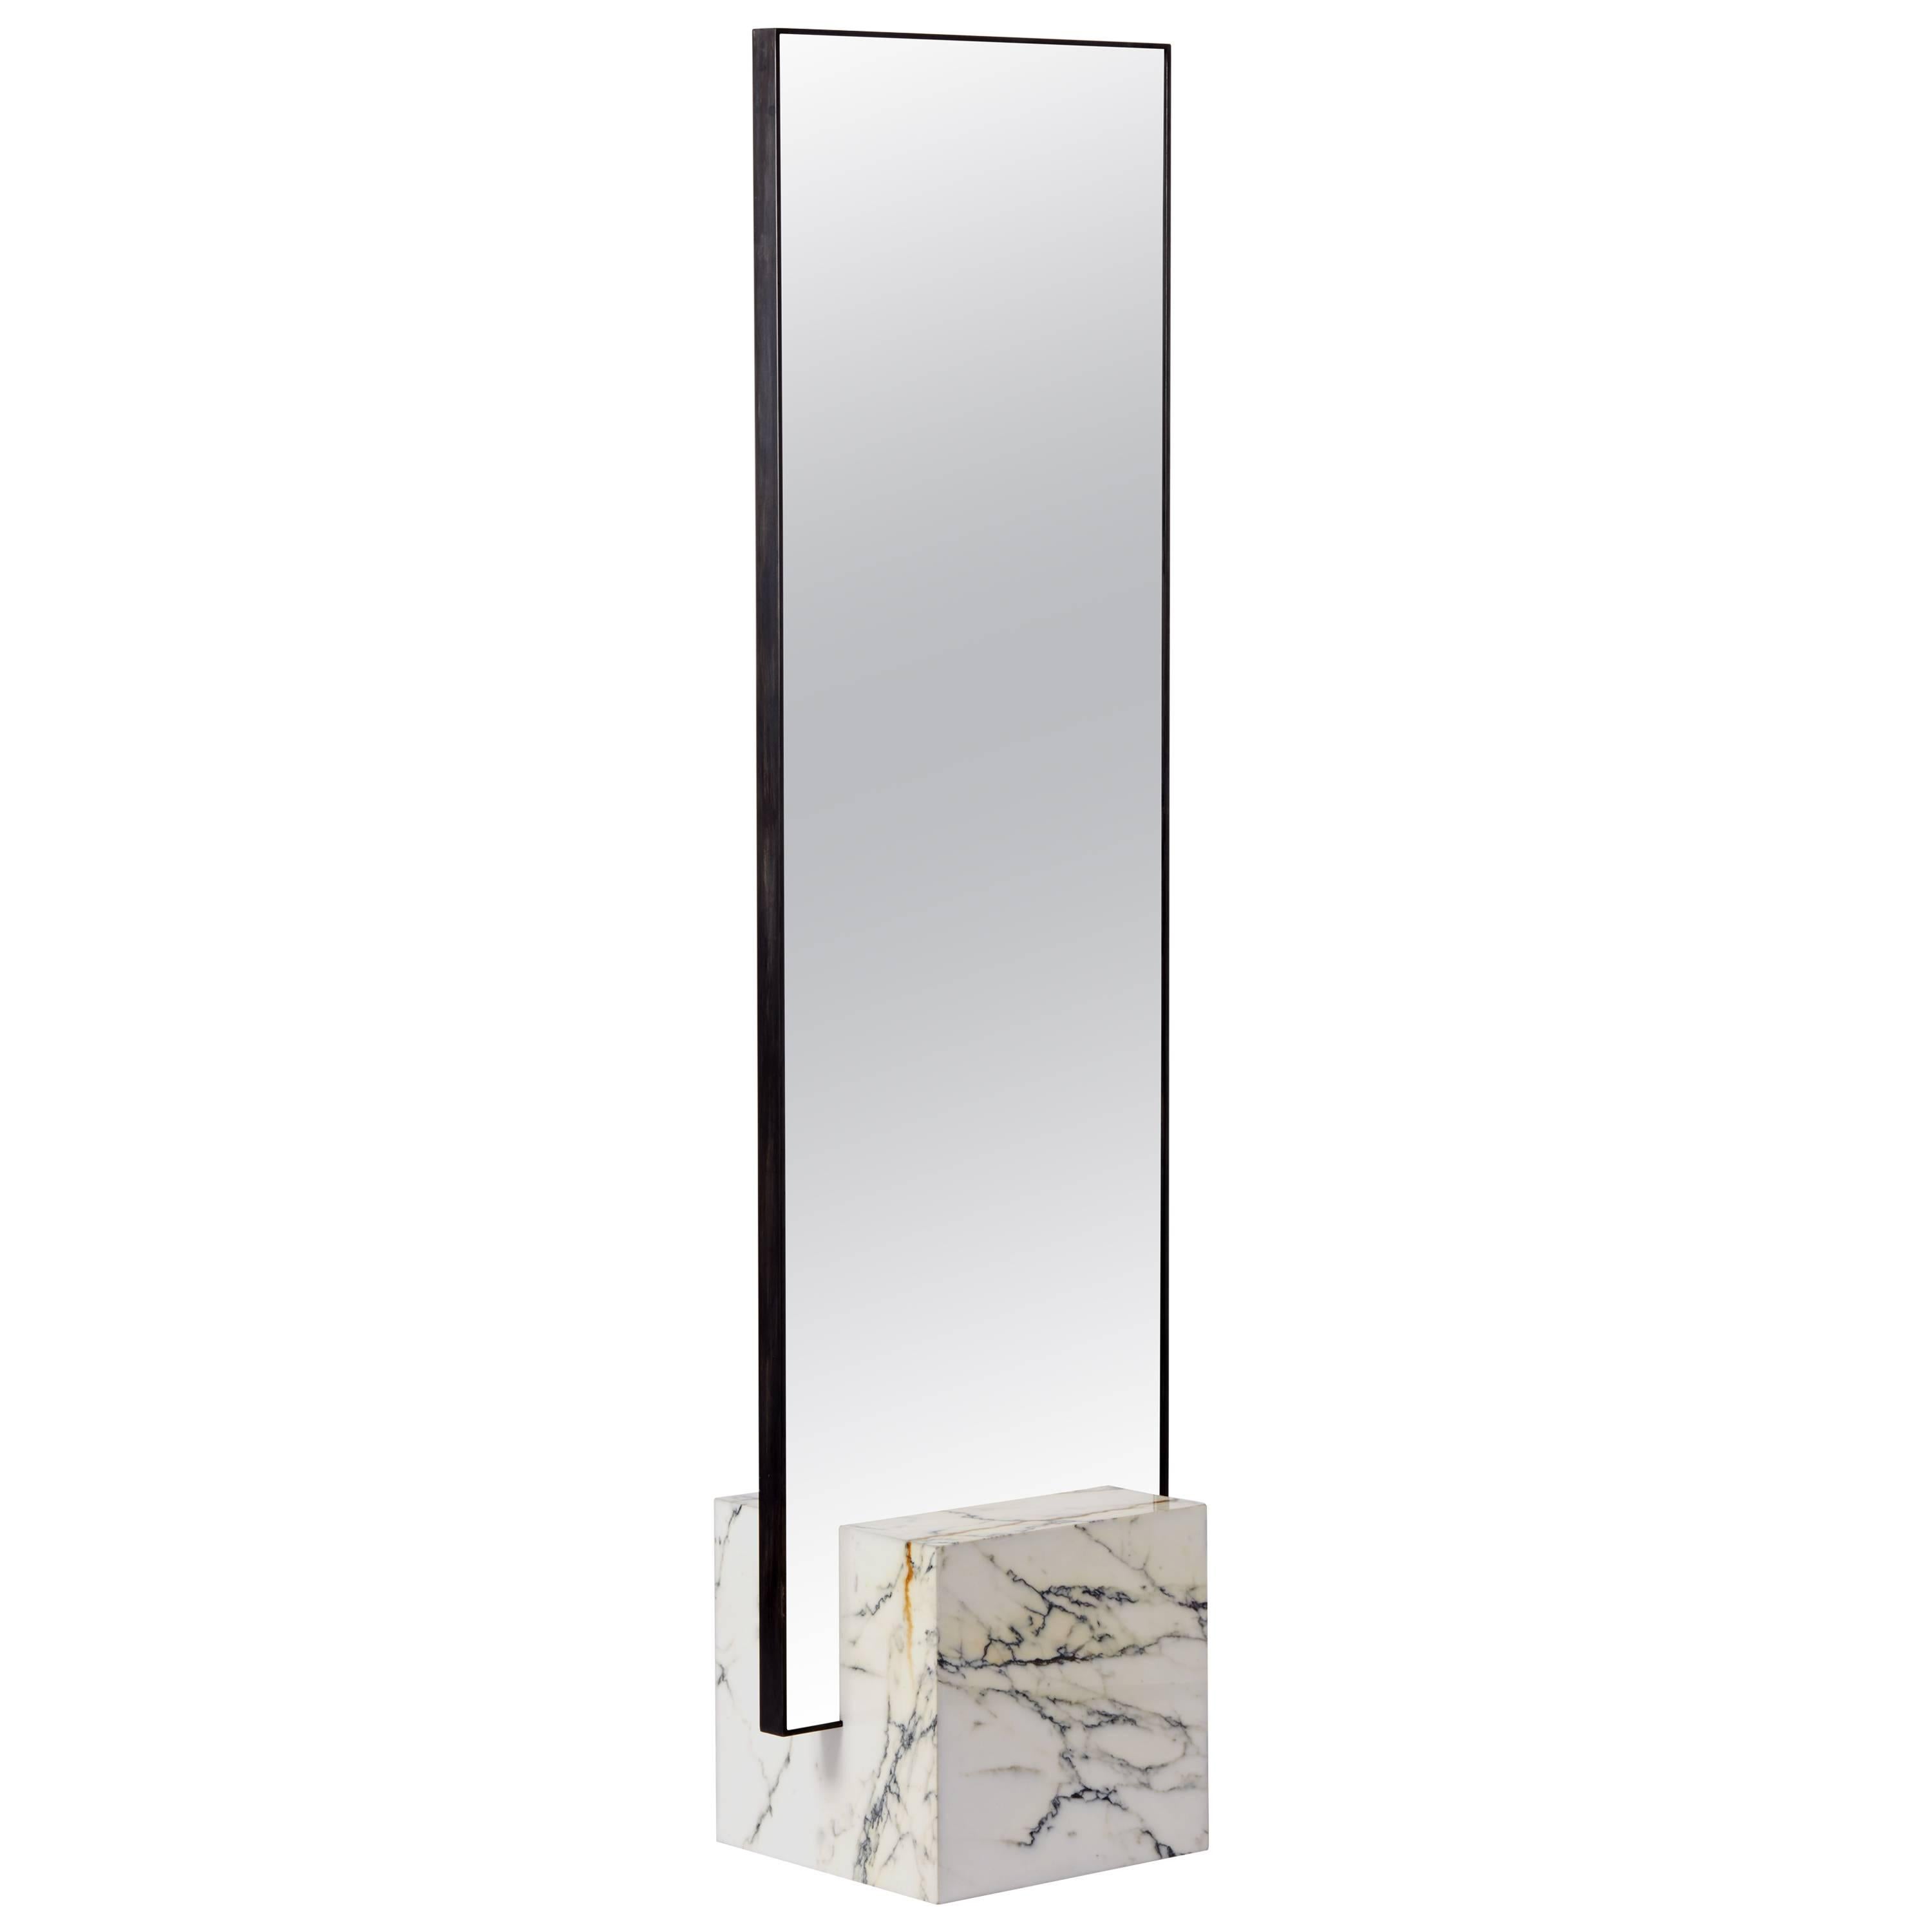 Coexist Slash Standing Mirror with Marble, Concrete Rubber and Black Steel Frame For Sale